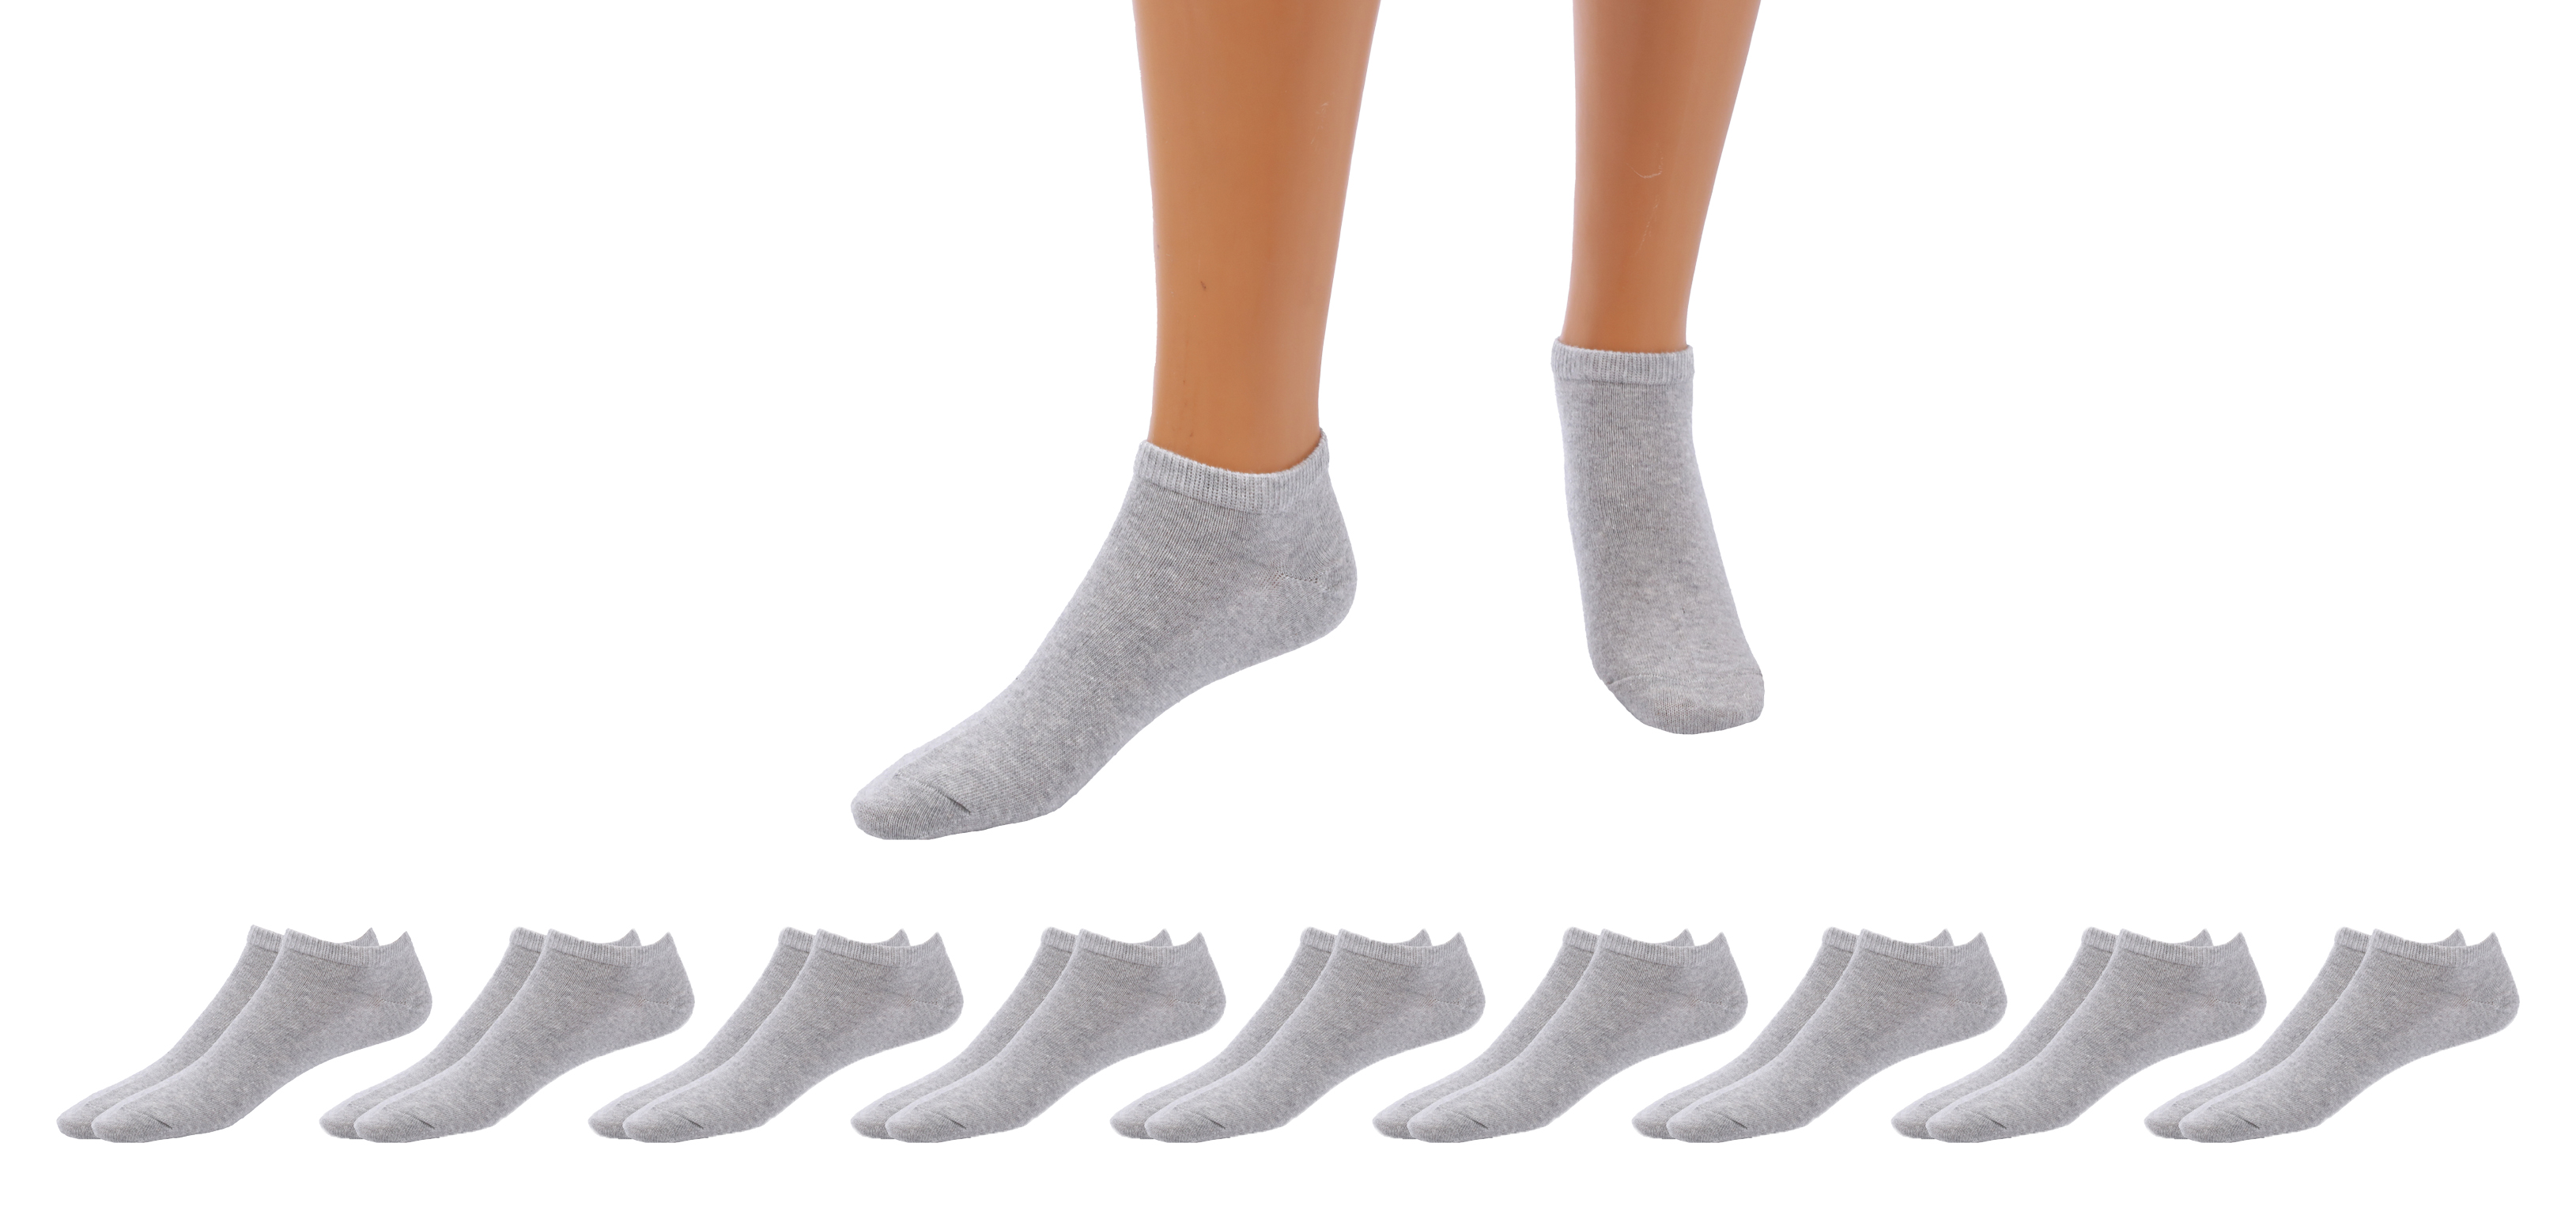 Jormatt 6 Pairs Men No Show Low Cut Socks Non Slip Athletic Sneaker Socks  Comfort 100% Cotton Invisible Casual Invisible Socks For Flat Loafers,Size  6.5-10 : Amazon.in: Clothing & Accessories